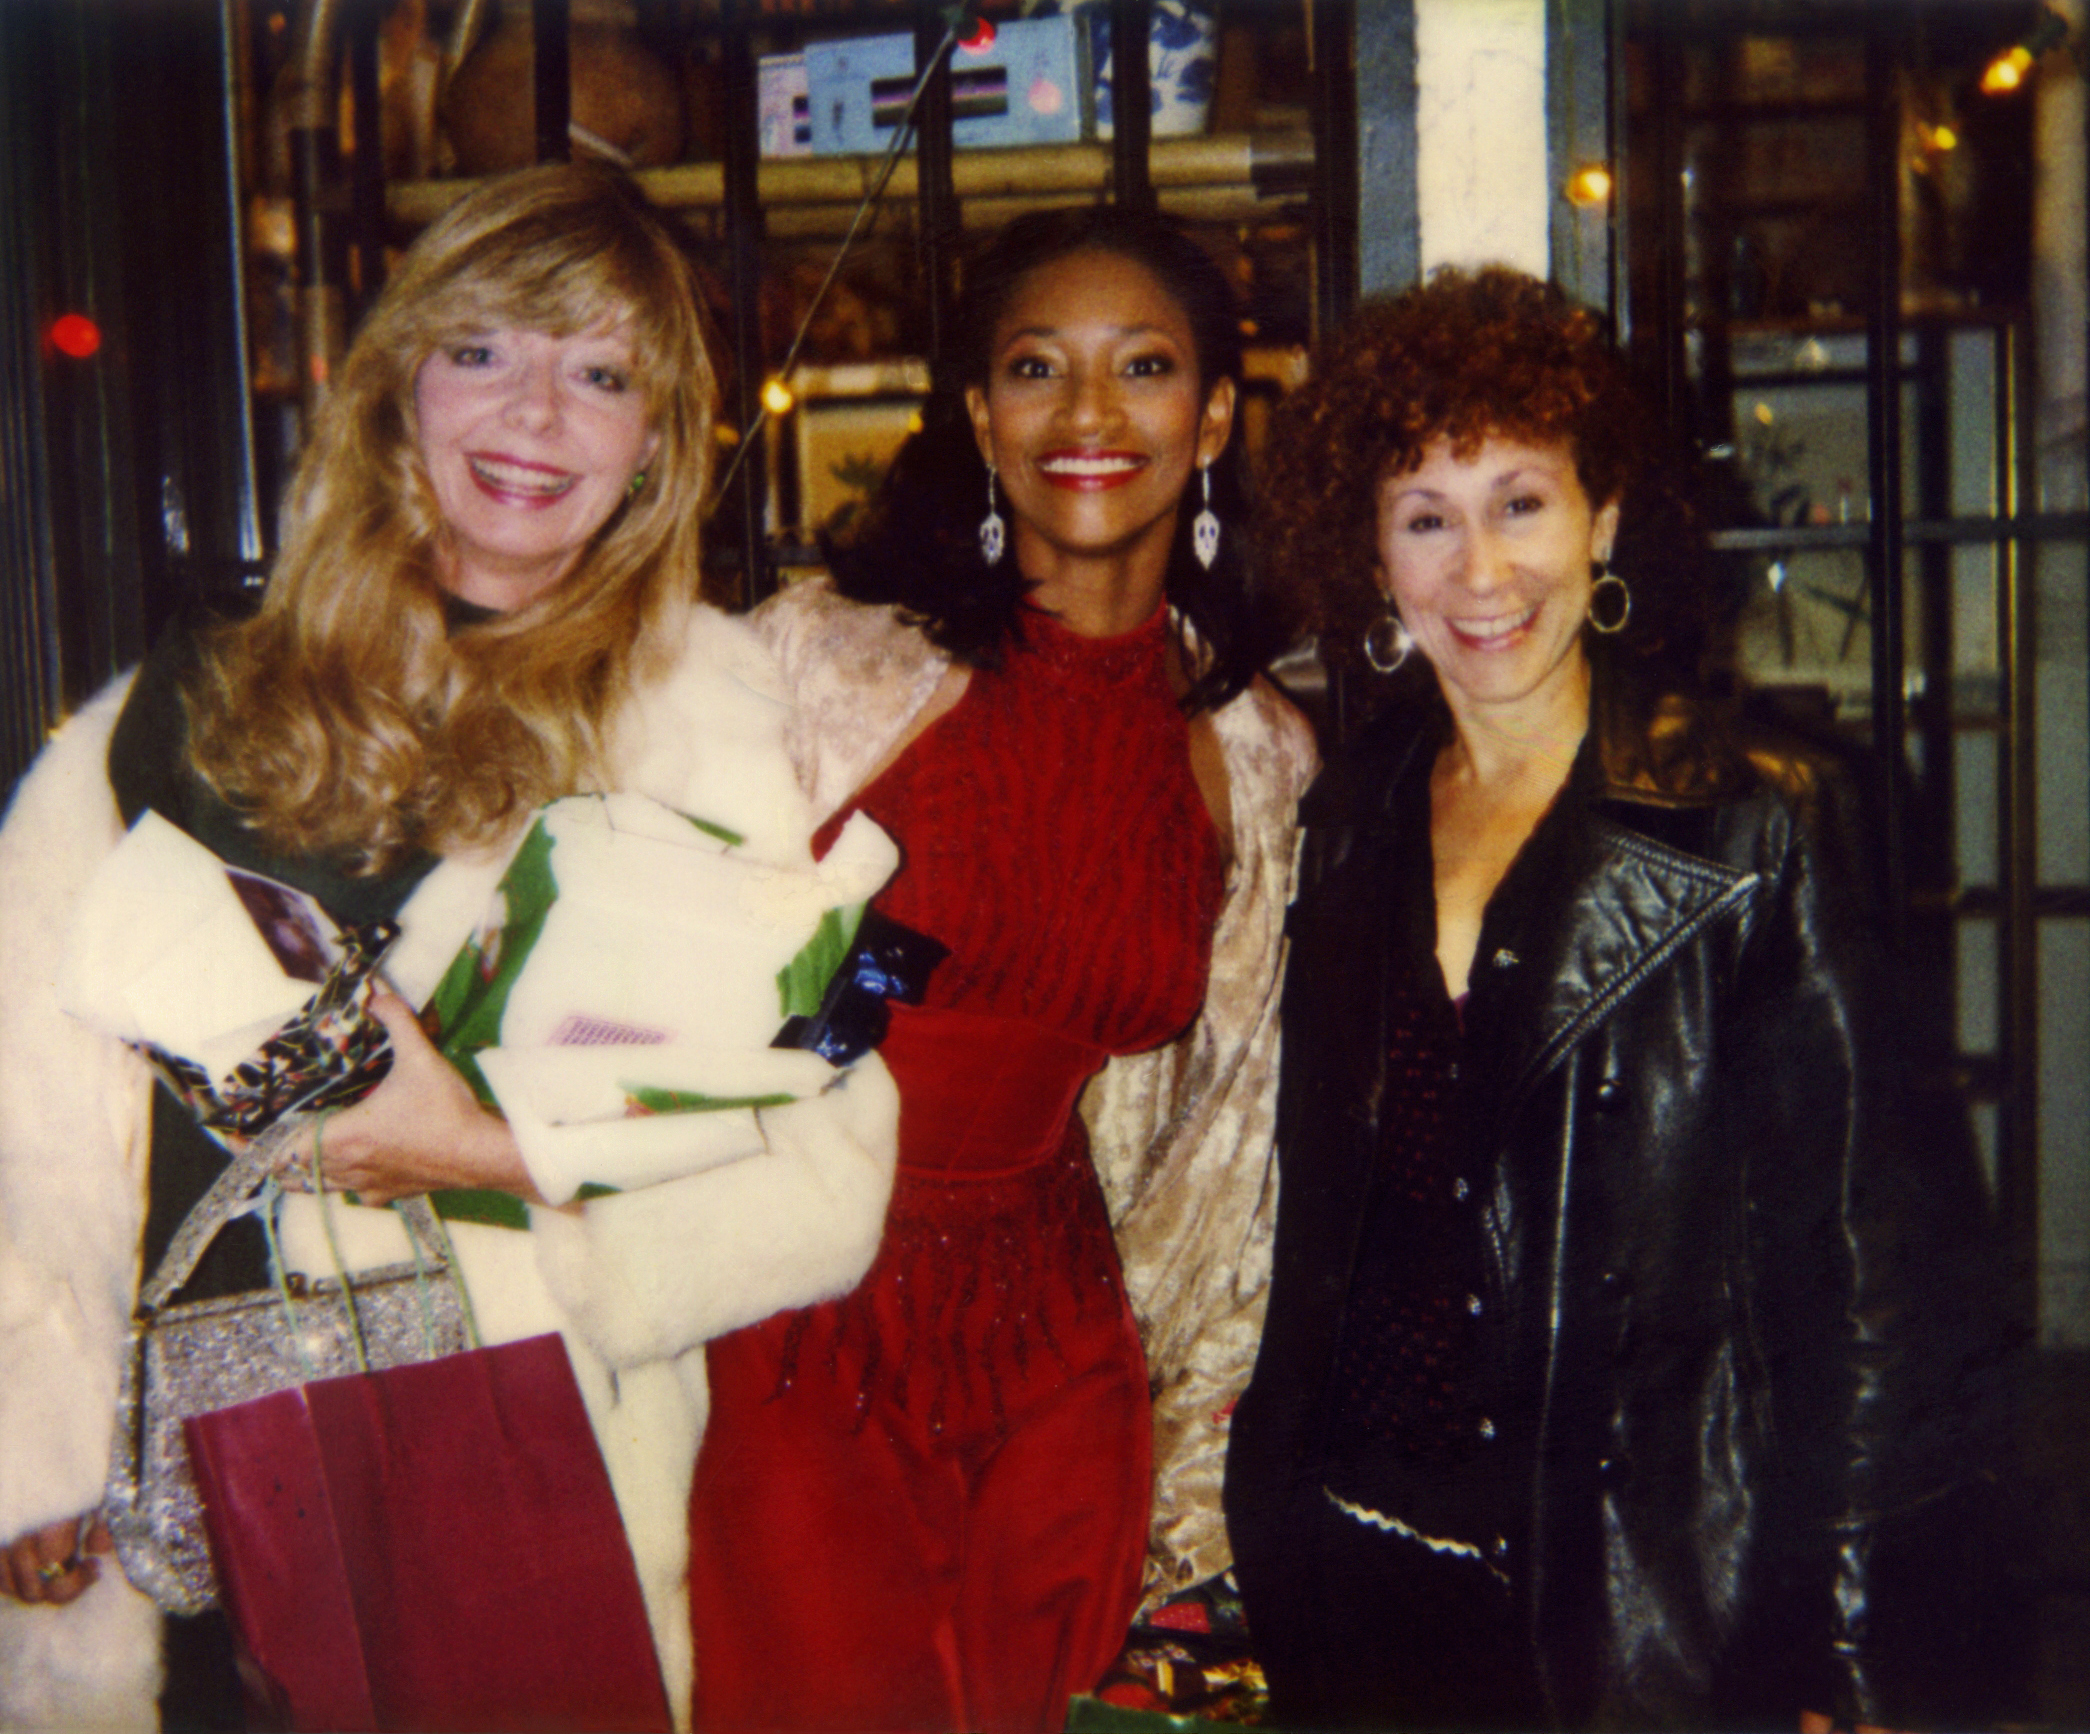 Grif Griffis, Pamella D'Pella and Rhea Perlman still from the final scene of 